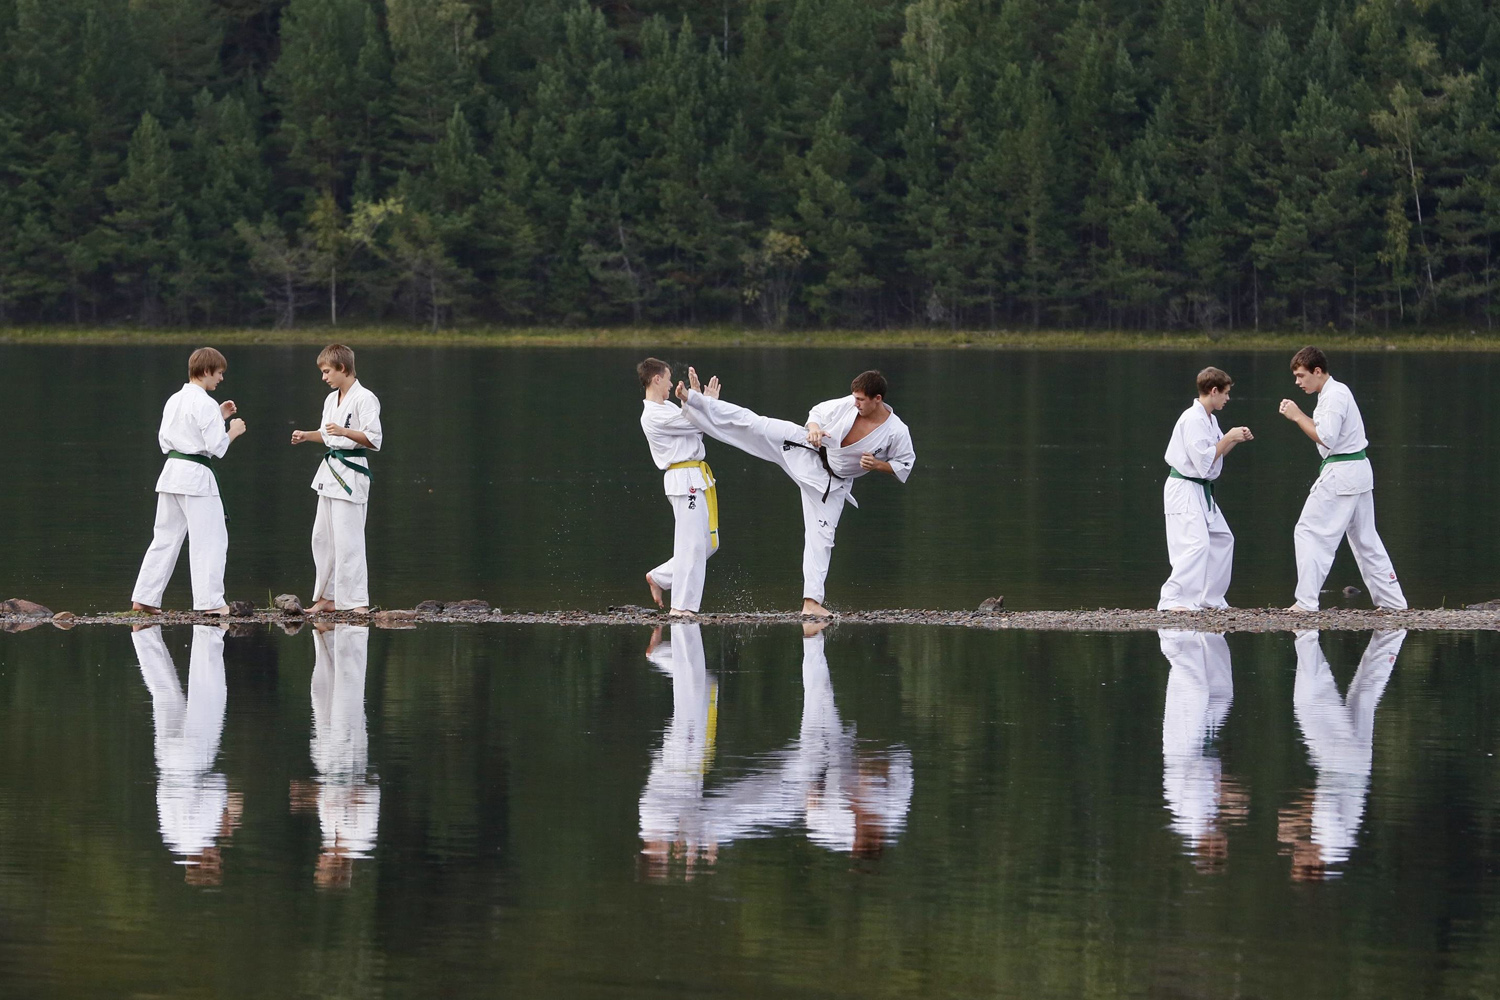 Young members of a local Kyokushin Karate federation perform during an exercise session at a summer training camp in Taiga district on a bank of the Yenisei River near the town of Divnogorsk